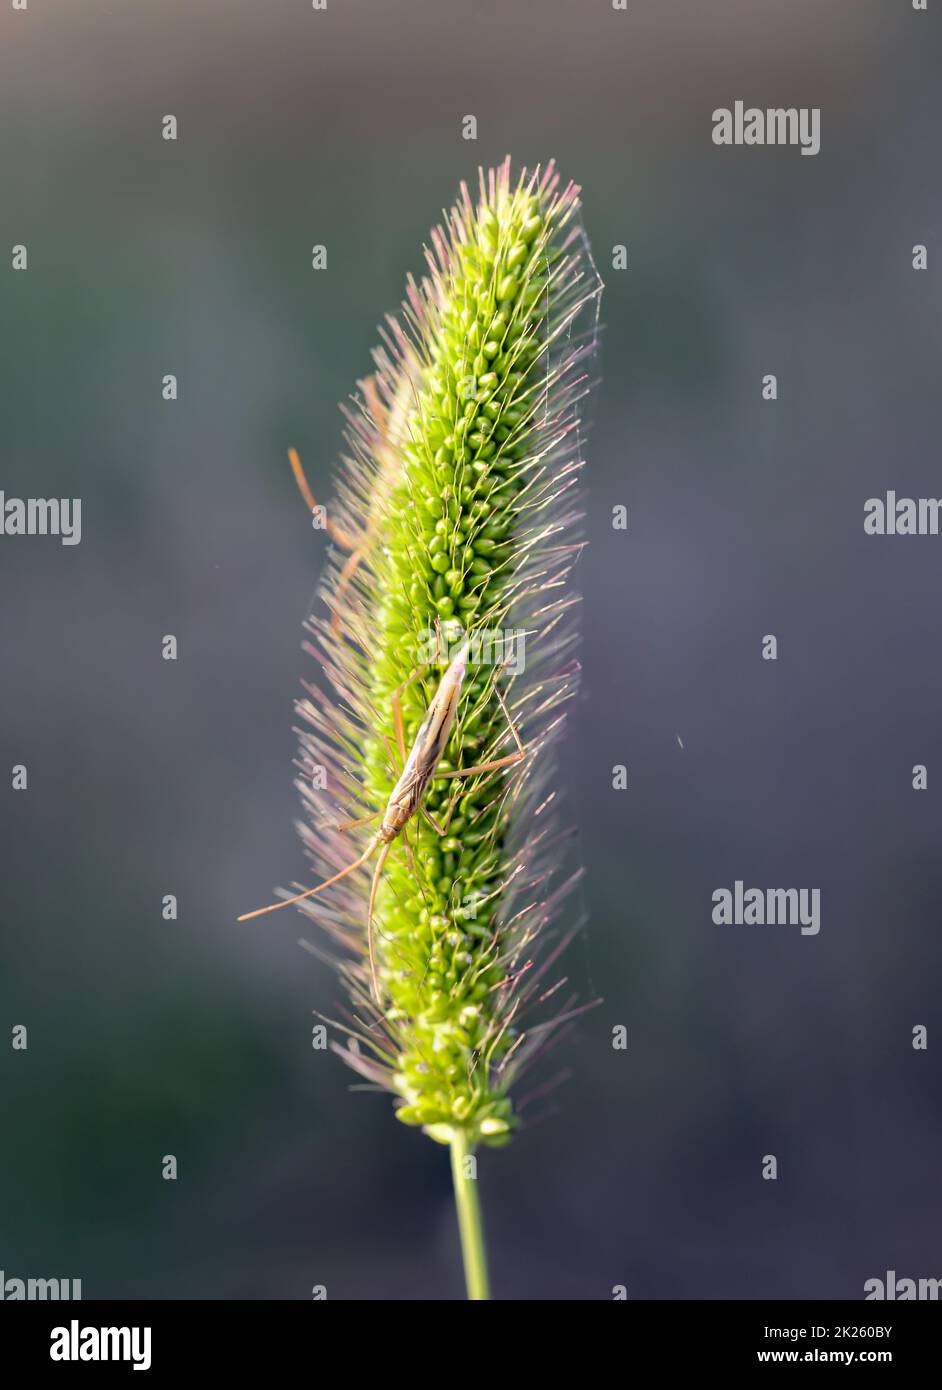 Two horror-like insects sit on the seed part of a grass plant. Stock Photo